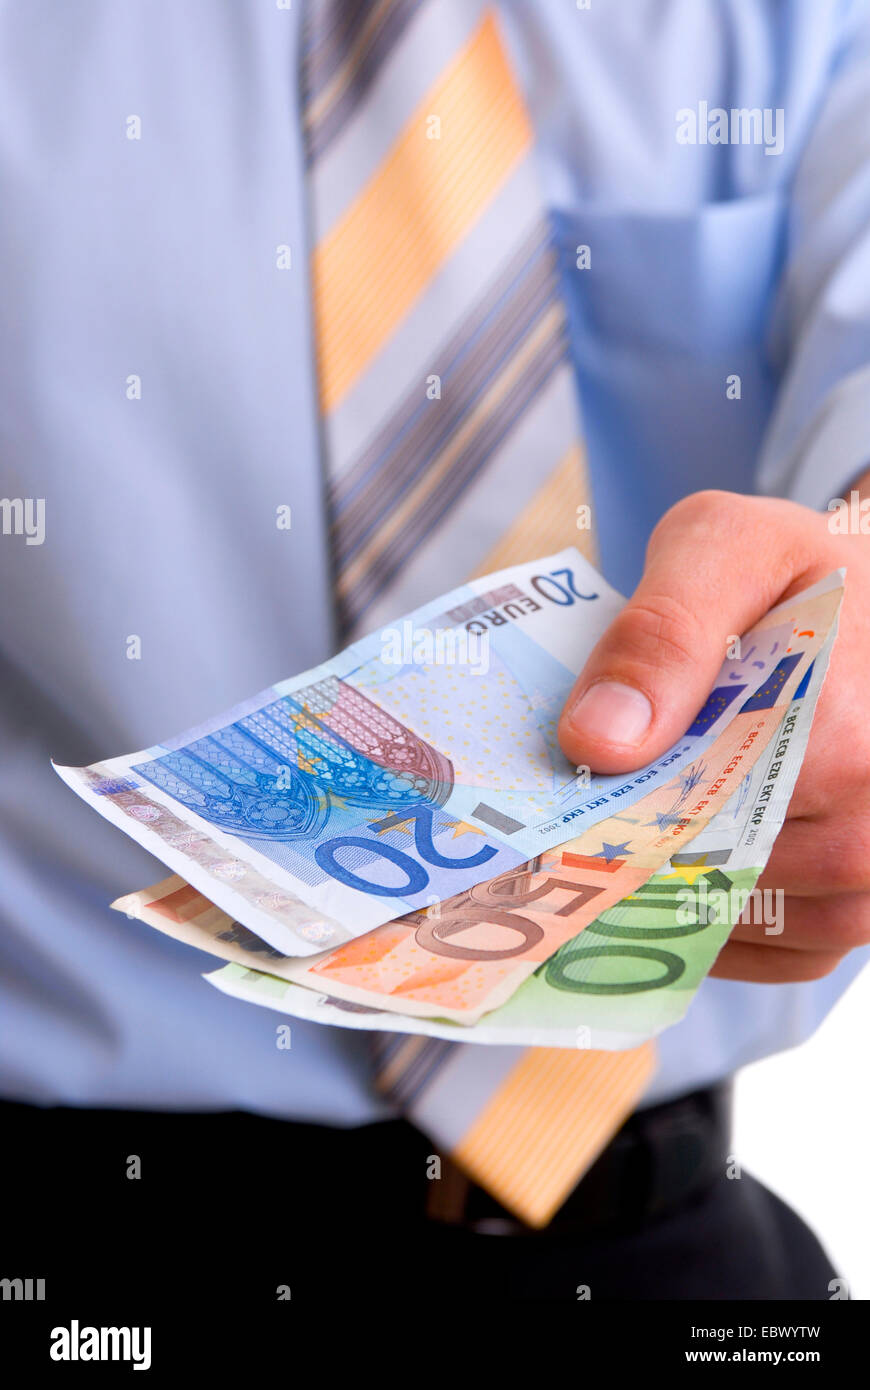 businessmann with banknotes Stock Photo